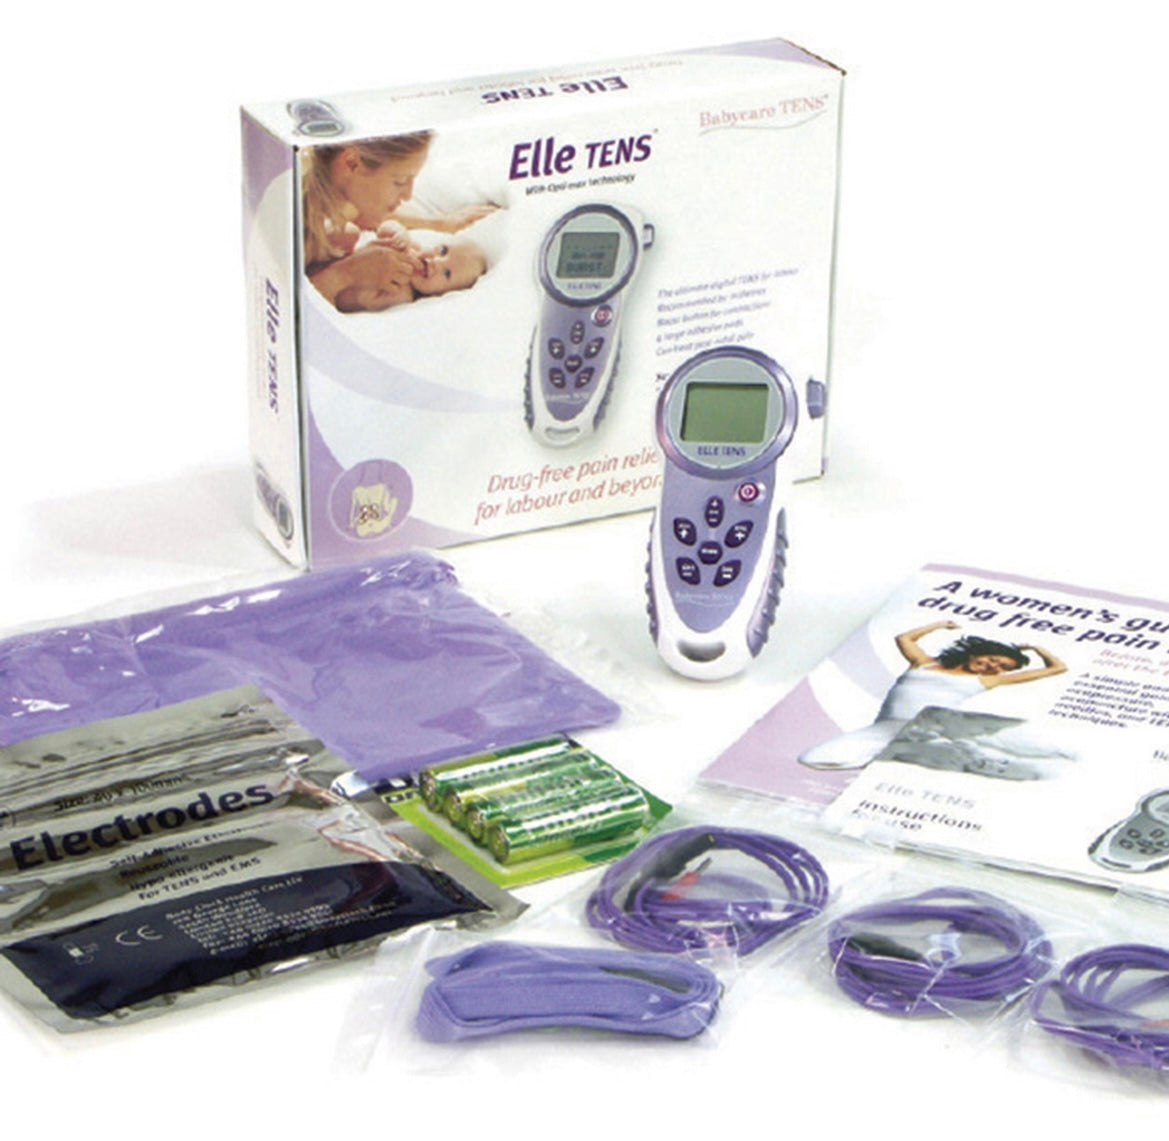 Image of Babycare Elle Tens box showing all components; machine, batteries, leads, carry neck cord, pouch and drug free pain guide